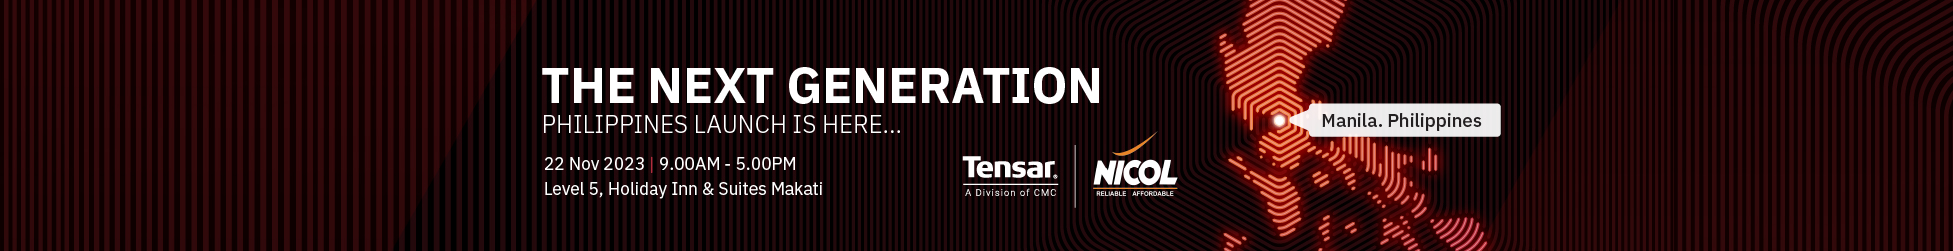 Image of Tensar Next Generation Launch - Philippines